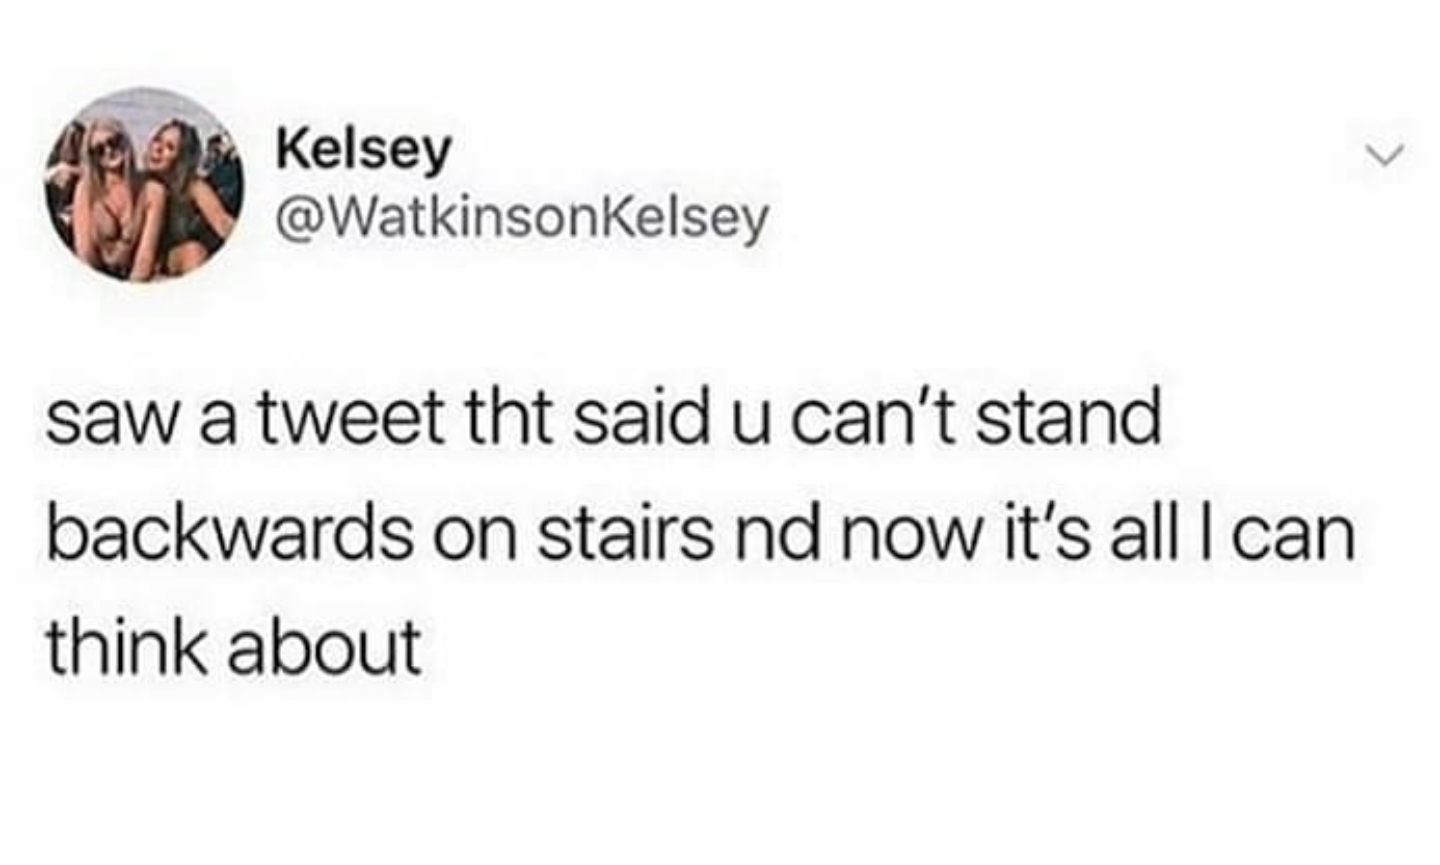 can t stand backwards on stairs - Kelsey saw a tweet tht said u can't stand backwards on stairs nd now it's all I can think about